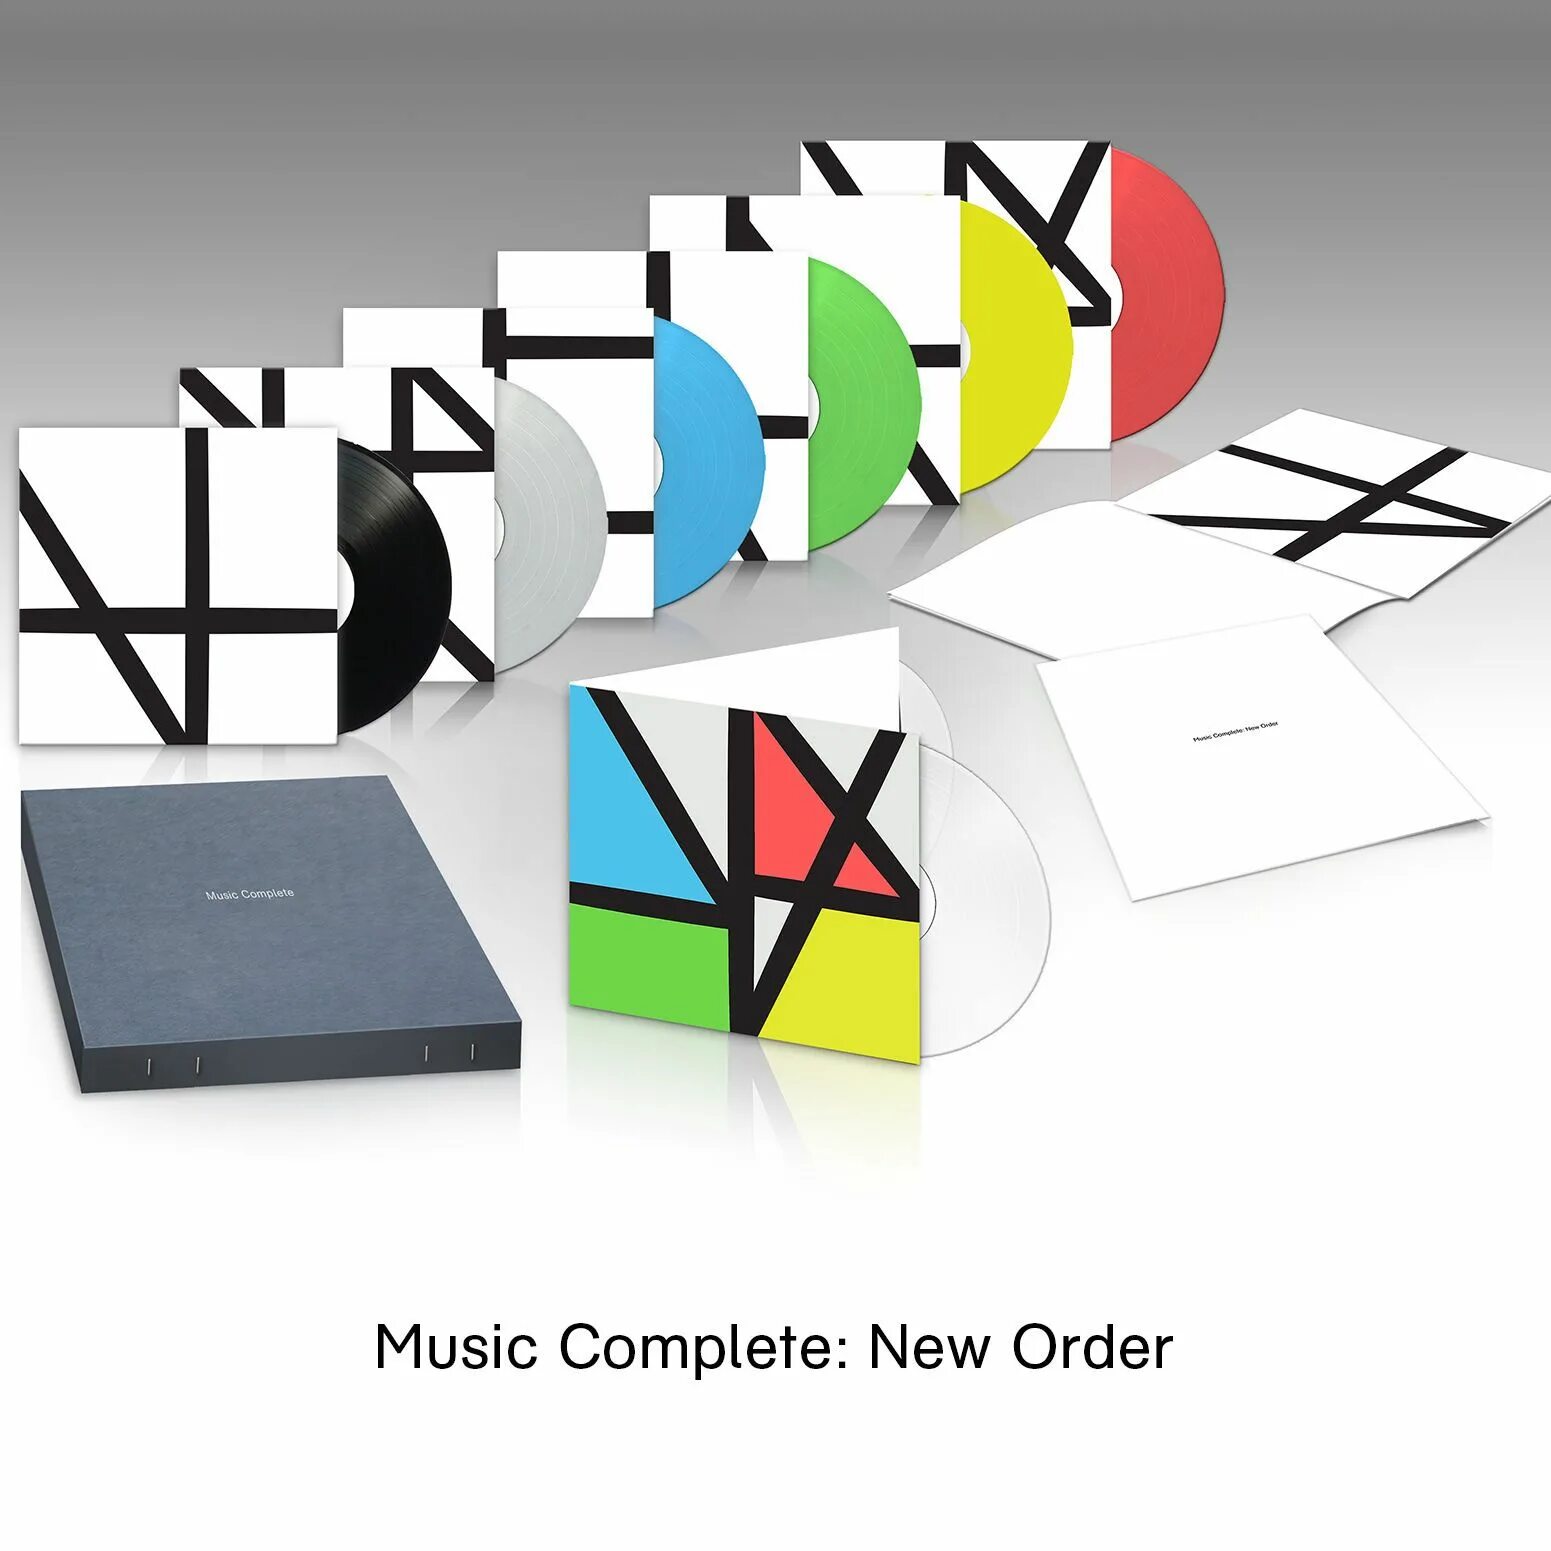 New complete. New order Music complete. New order Vinyl. New order album. New order Music complete 2015.